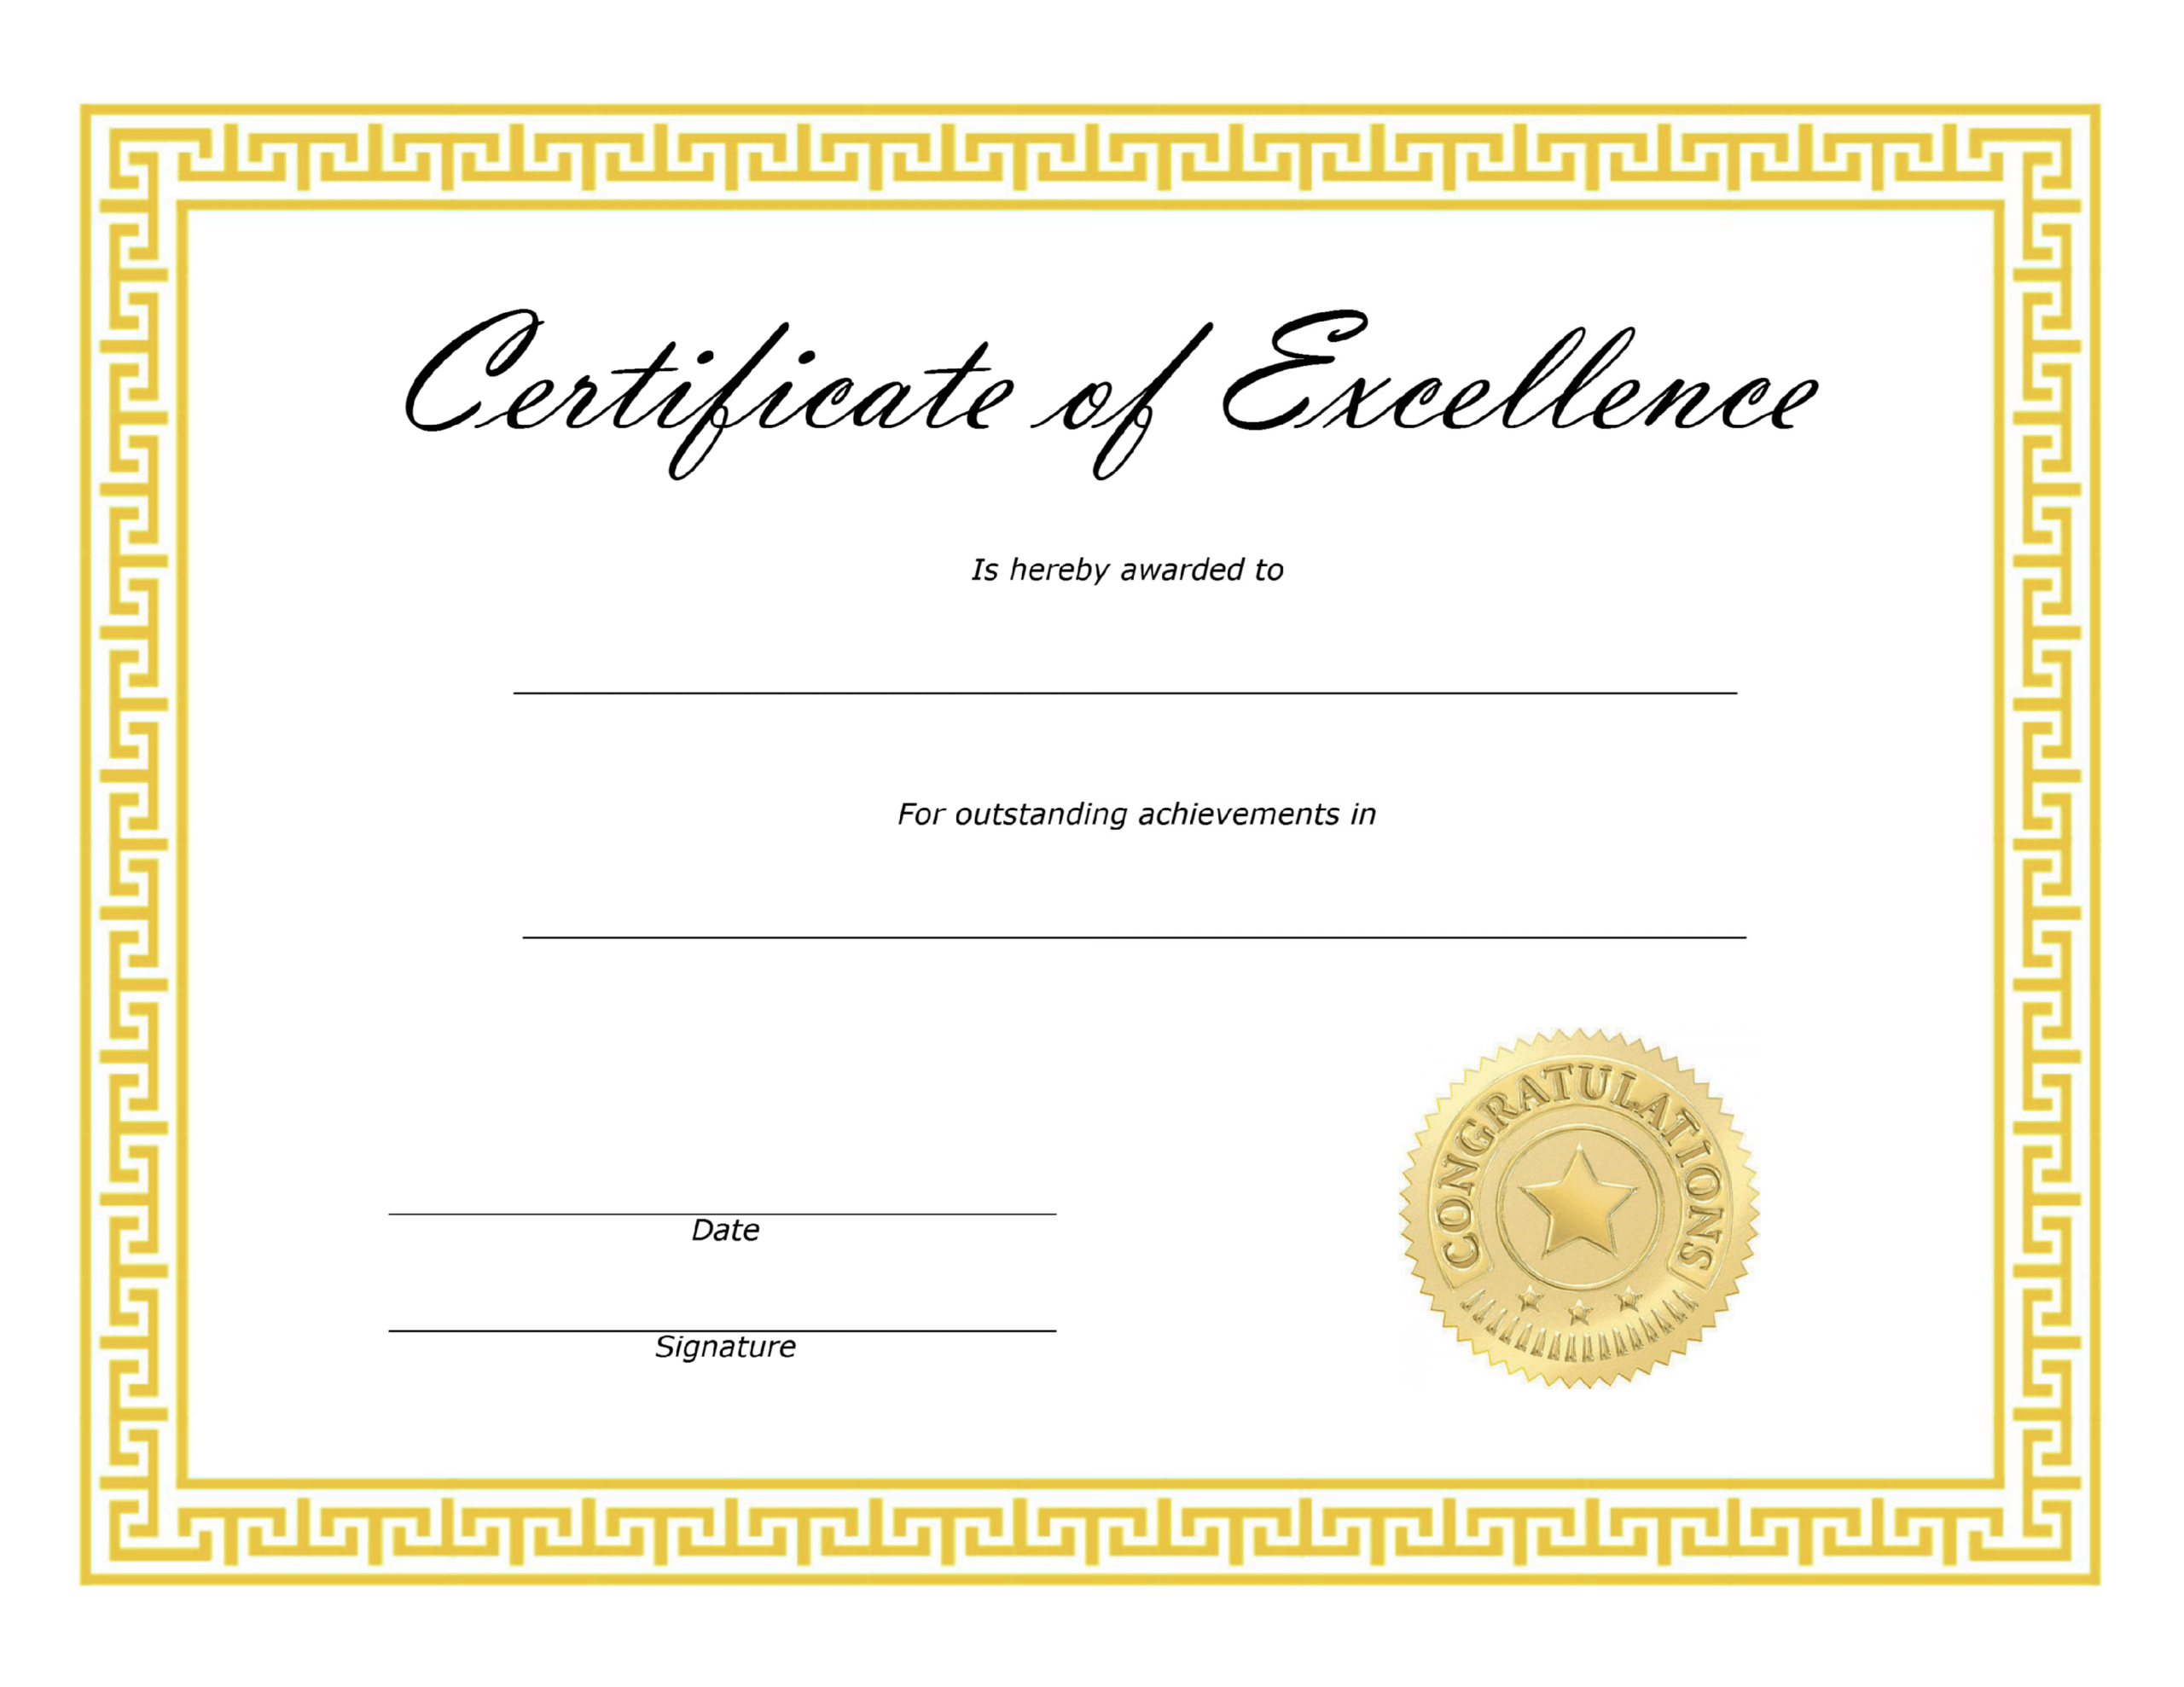 ❤️ Free Sample Certificate Of Excellence Templates❤️ With Regard To Certificate Of Excellence Template Free Download